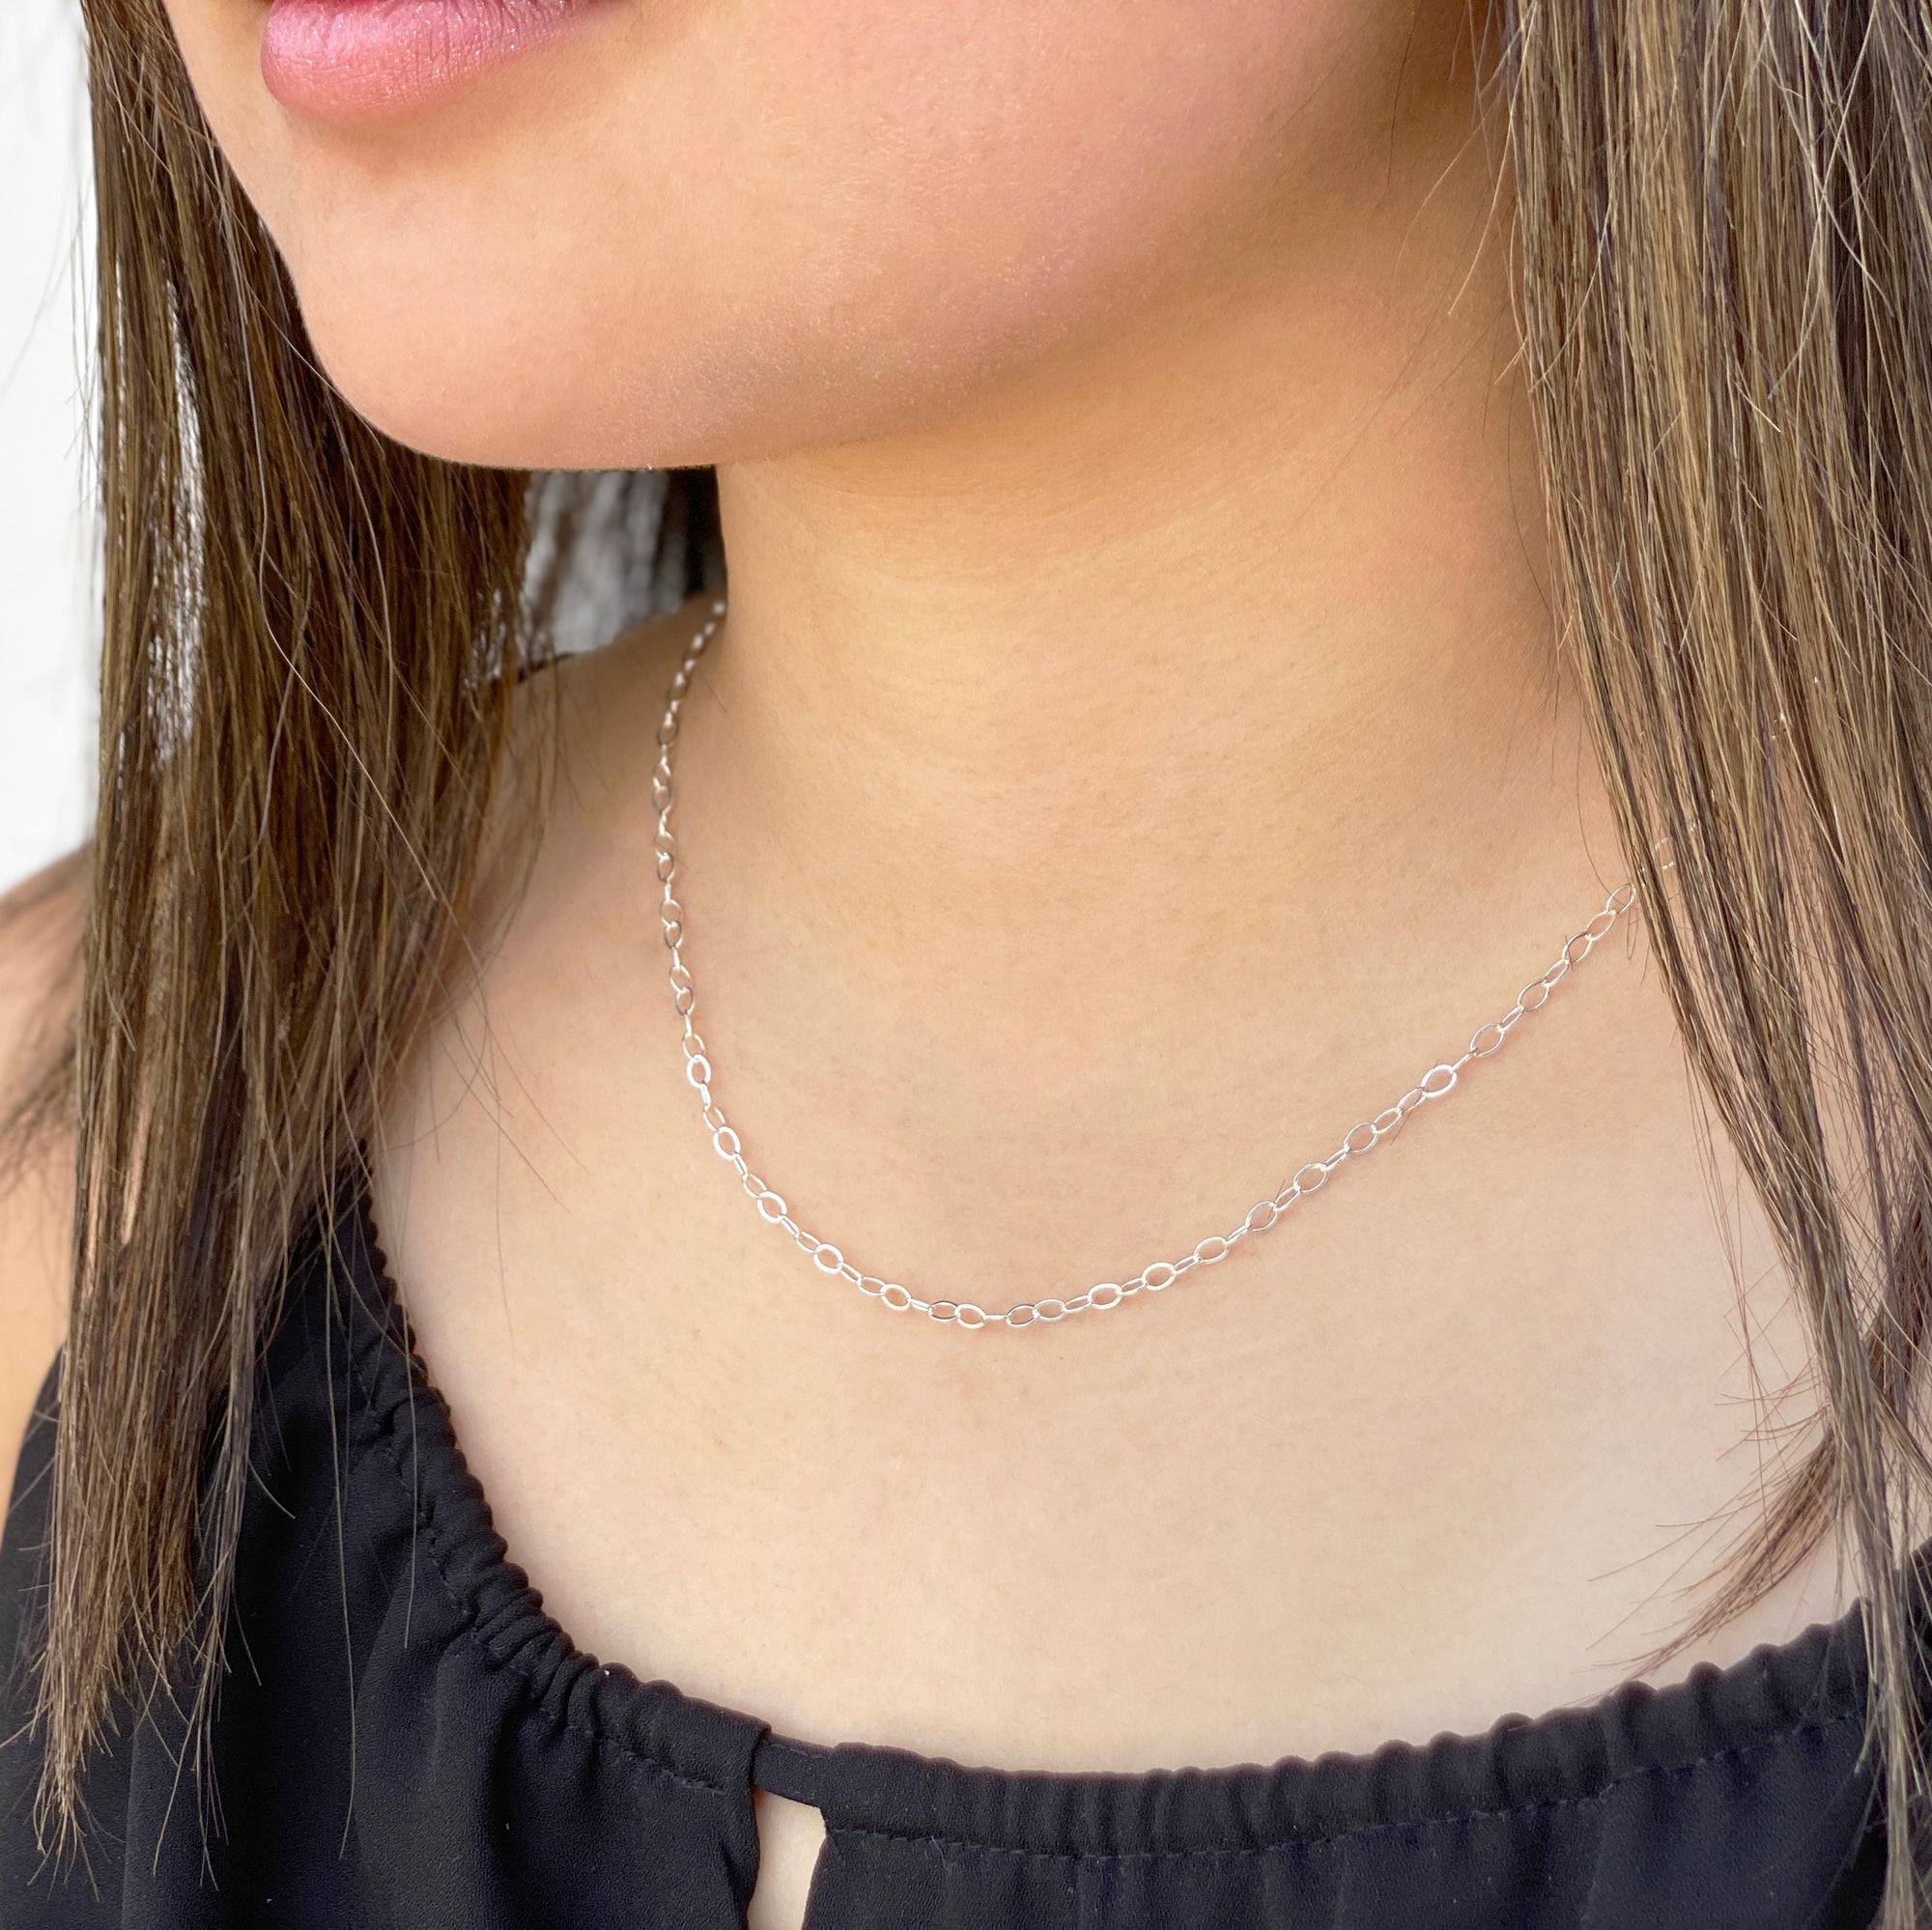 women wearing a silver cable chain necklace with 2.8 mm width links